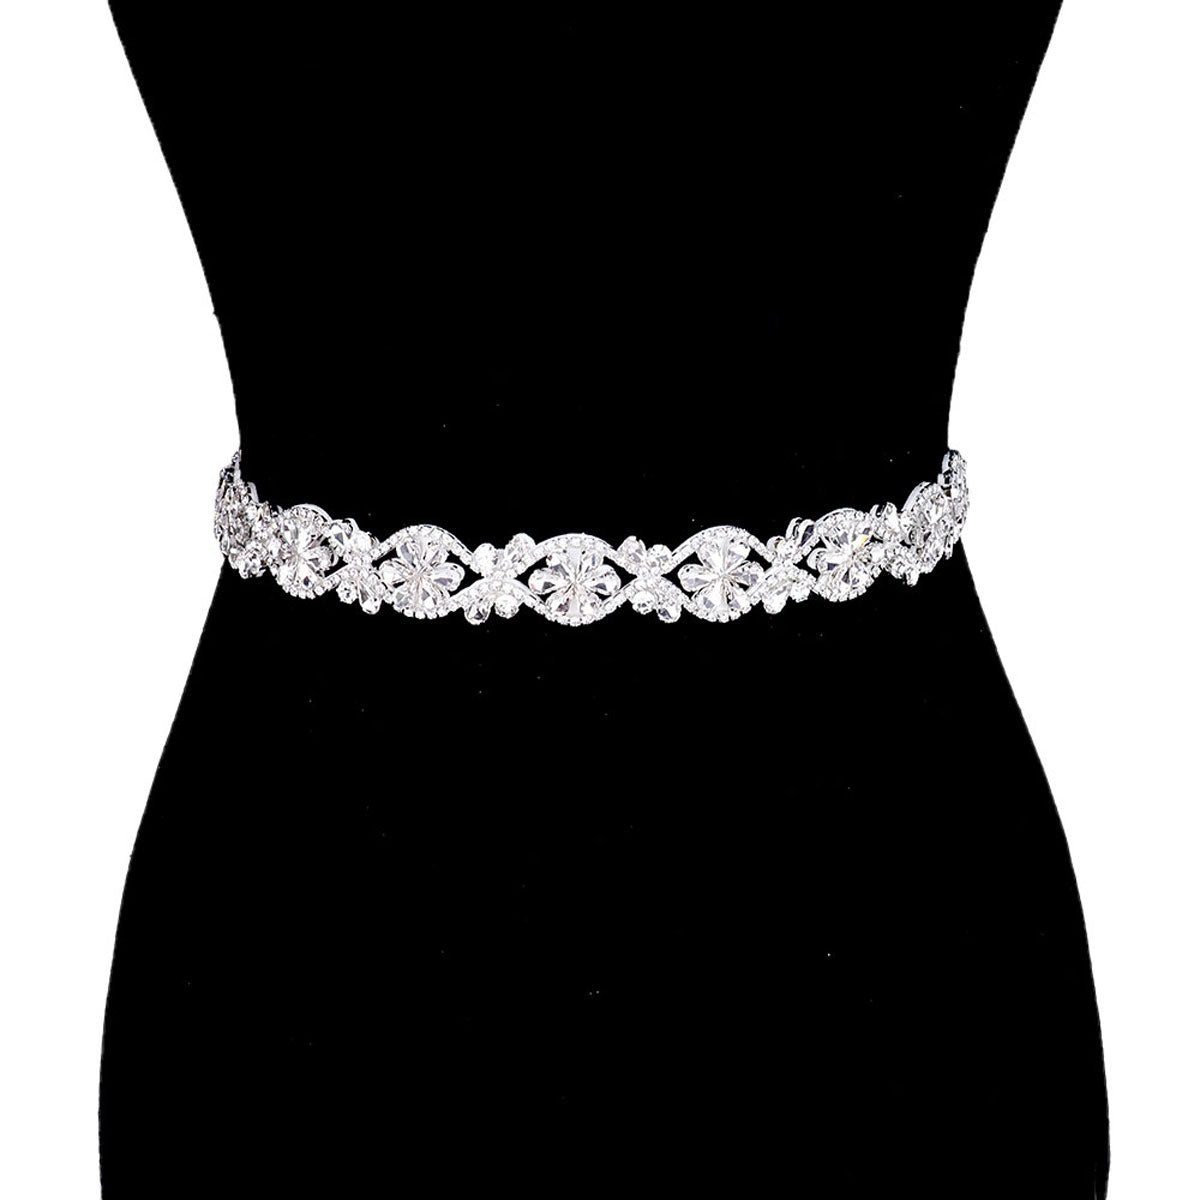 Clear Silver White Crystal Marquise Floral Sash Ribbon Bridal Wedding Belt Headband. A timeless selection, Bridal Belt, Rhinestone Belt, Bridal Belt Sash, Wedding Belt is exceptionally elegant, adding an exquisite detail to your wedding dress or tie it on your hair for a glamorous to any outfit.